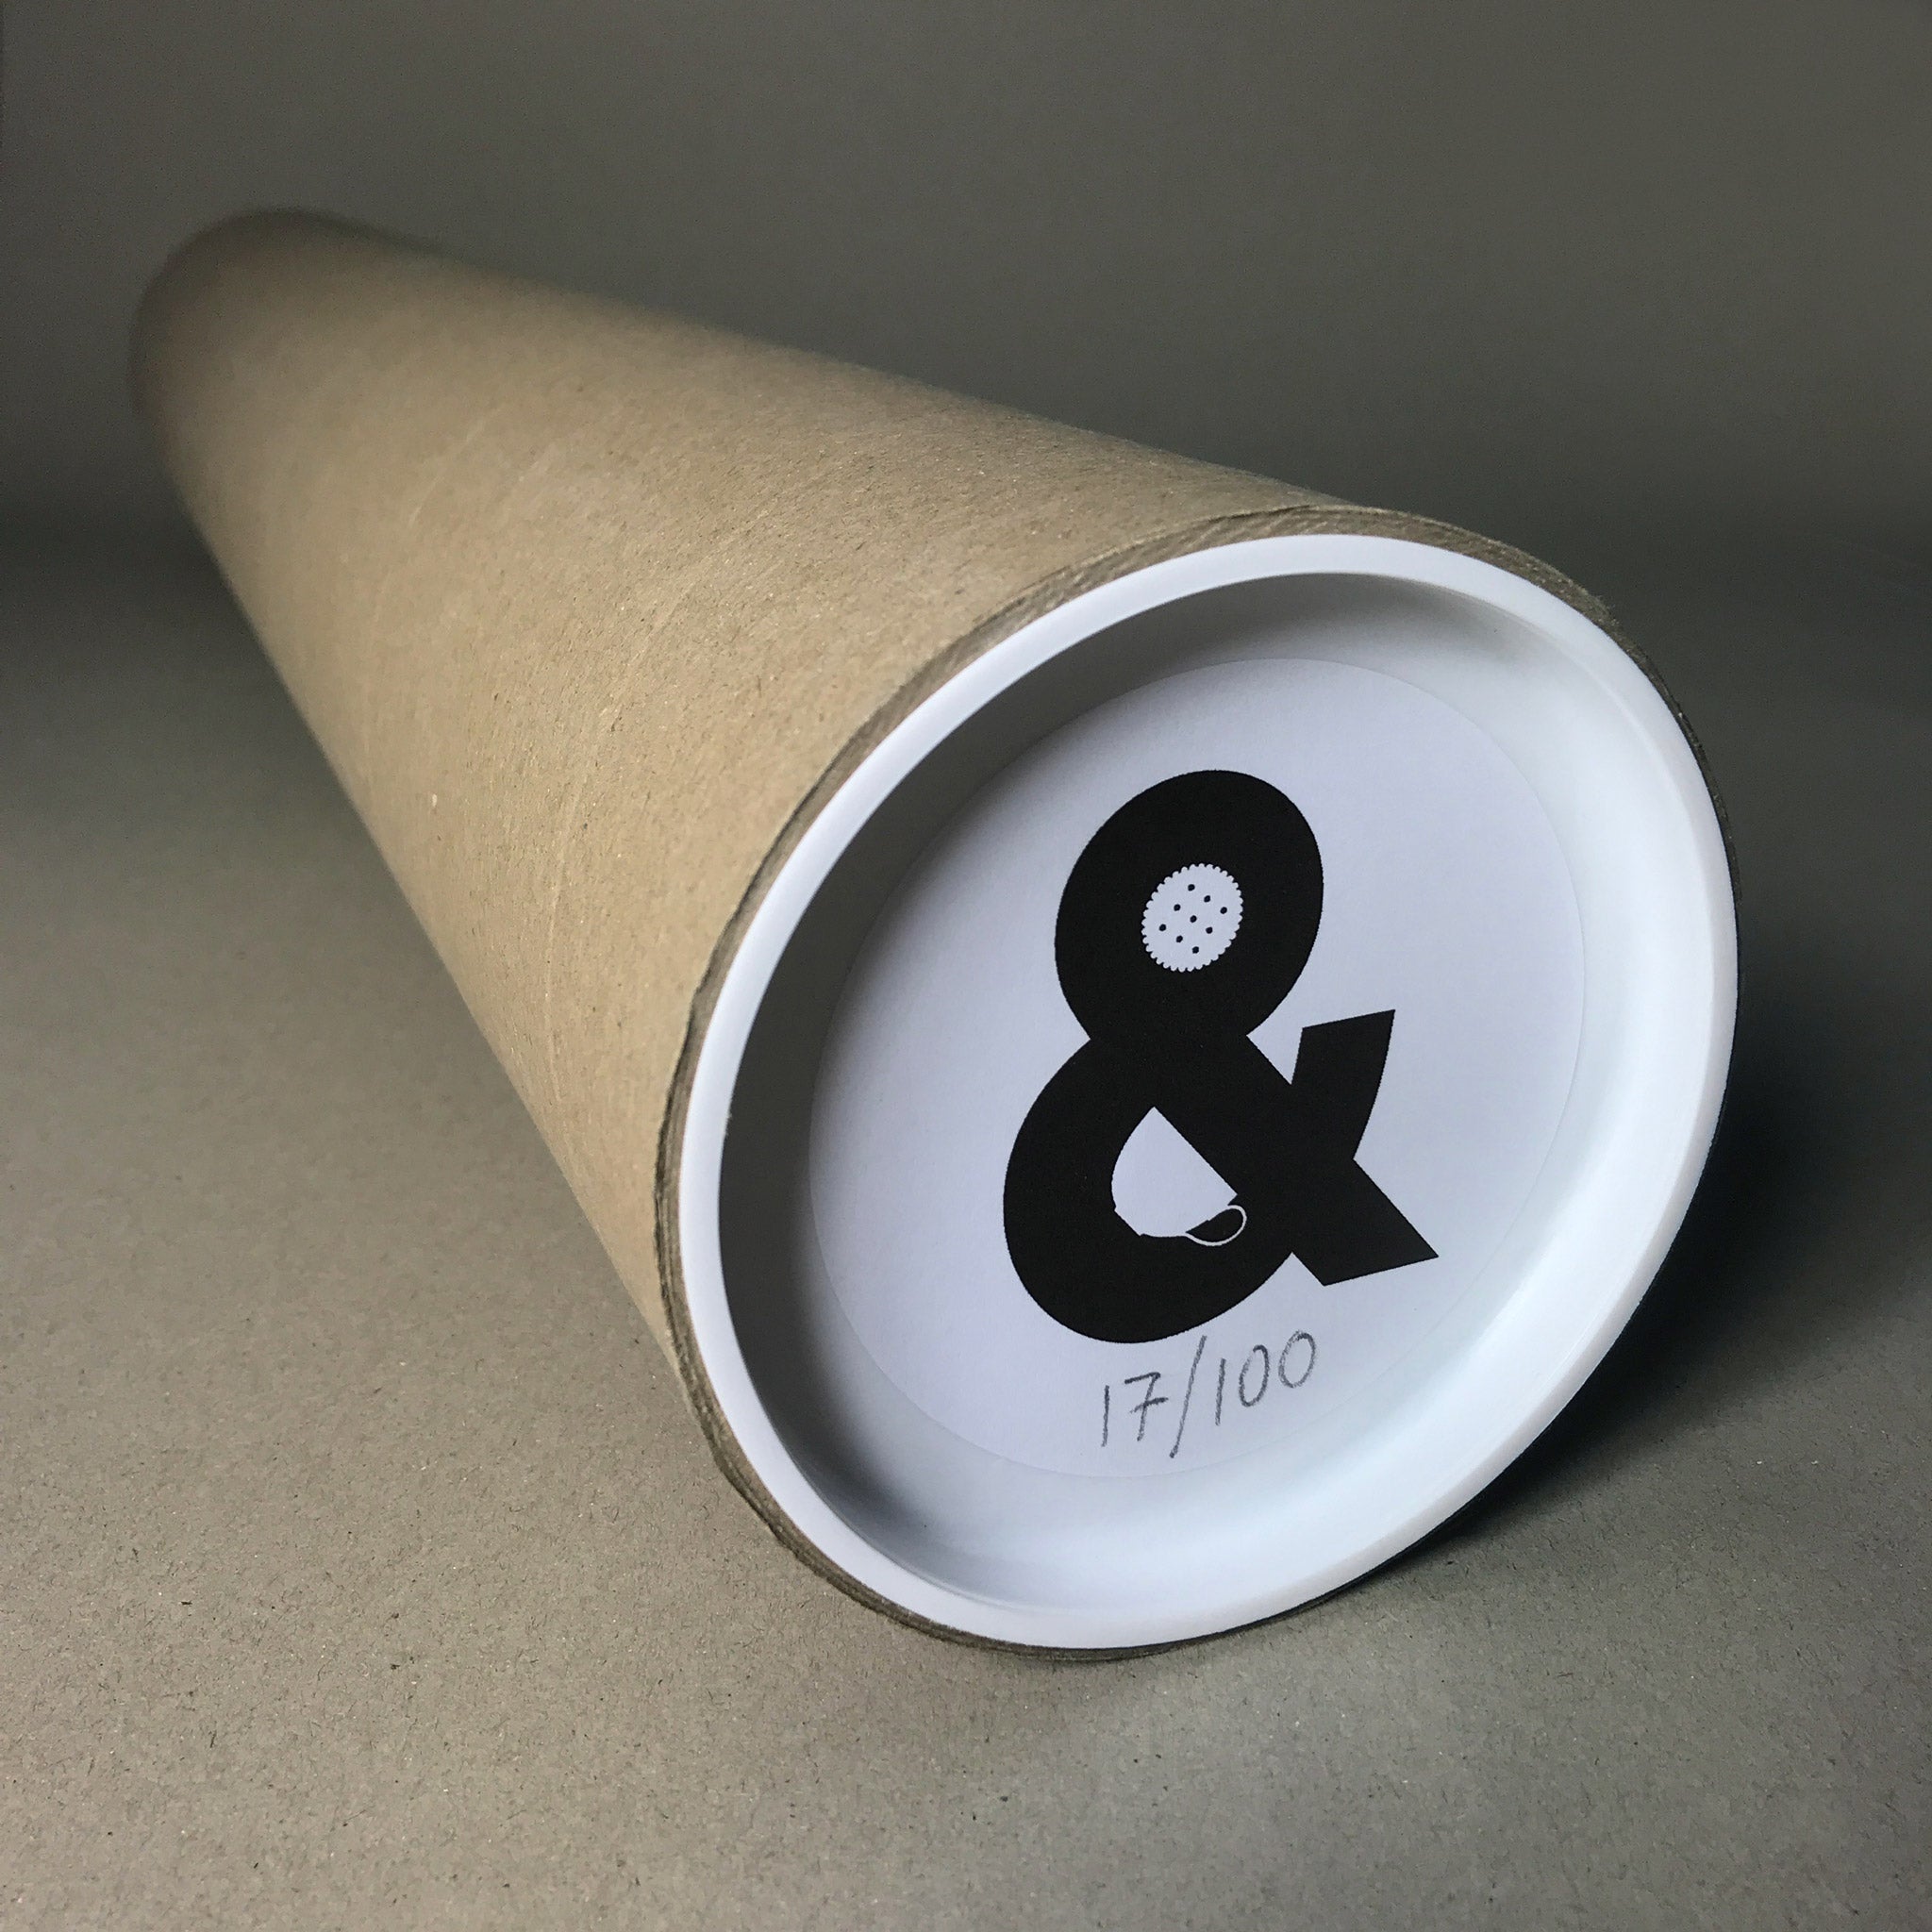 A cardboard tube laid on a plain grey background, containing the tea and biscuits ampersand with a sticker on the end depicting that.